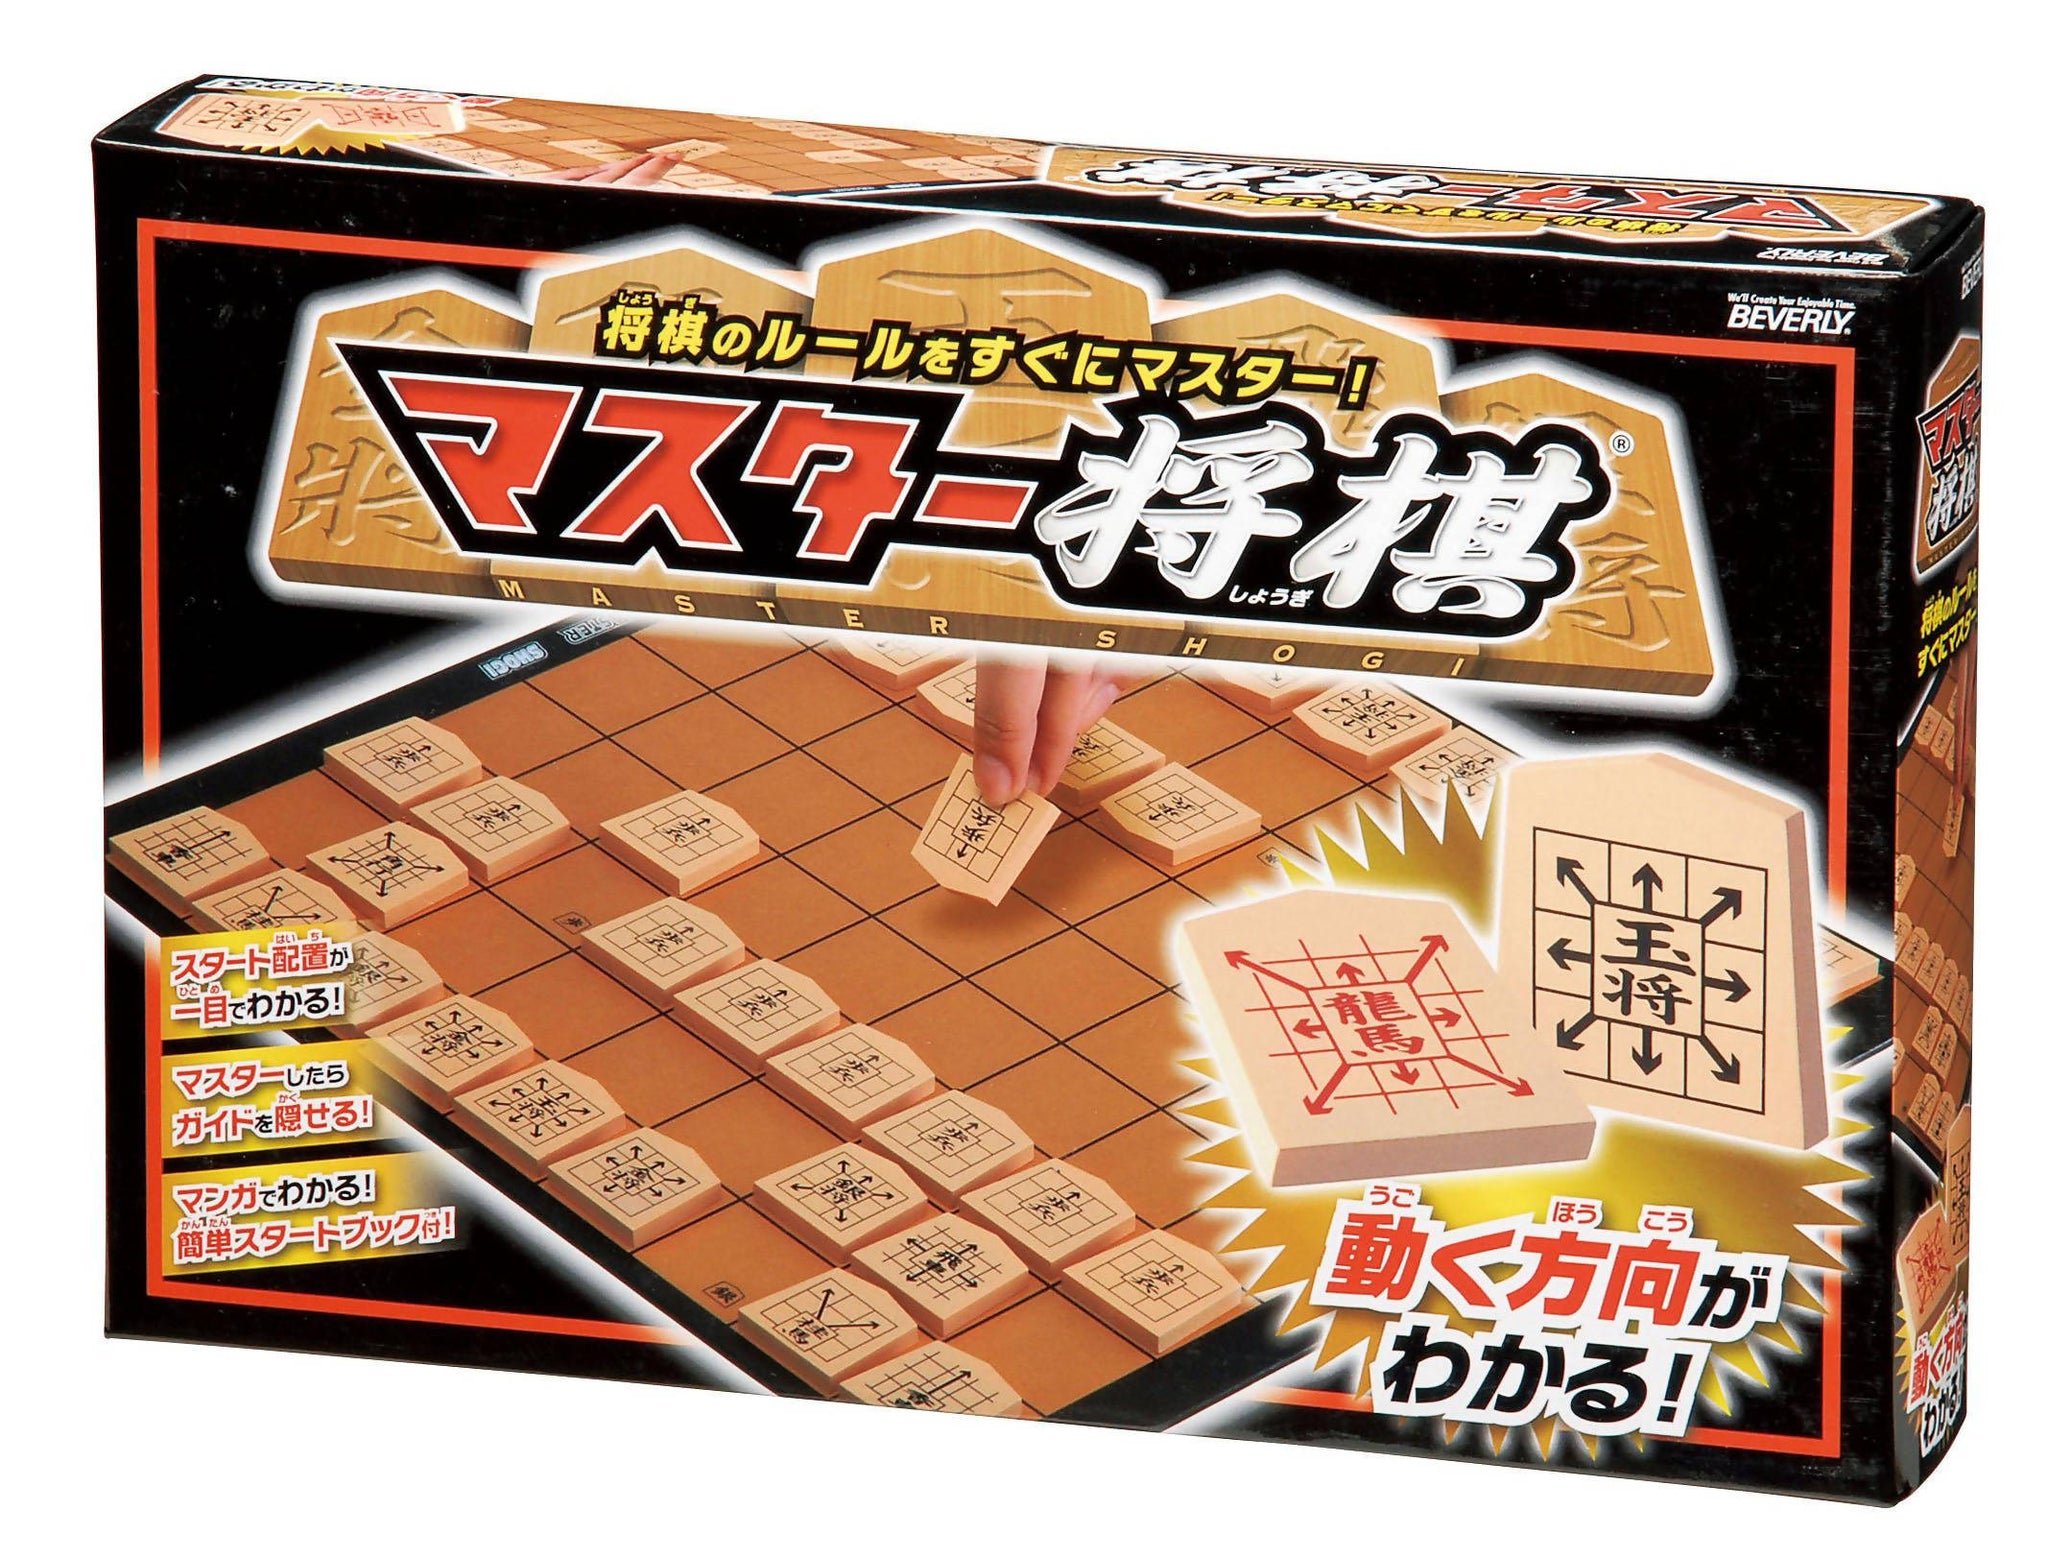 HAOCOO Foldable Magnetized Shogi Set – Compact for Easy Carrying